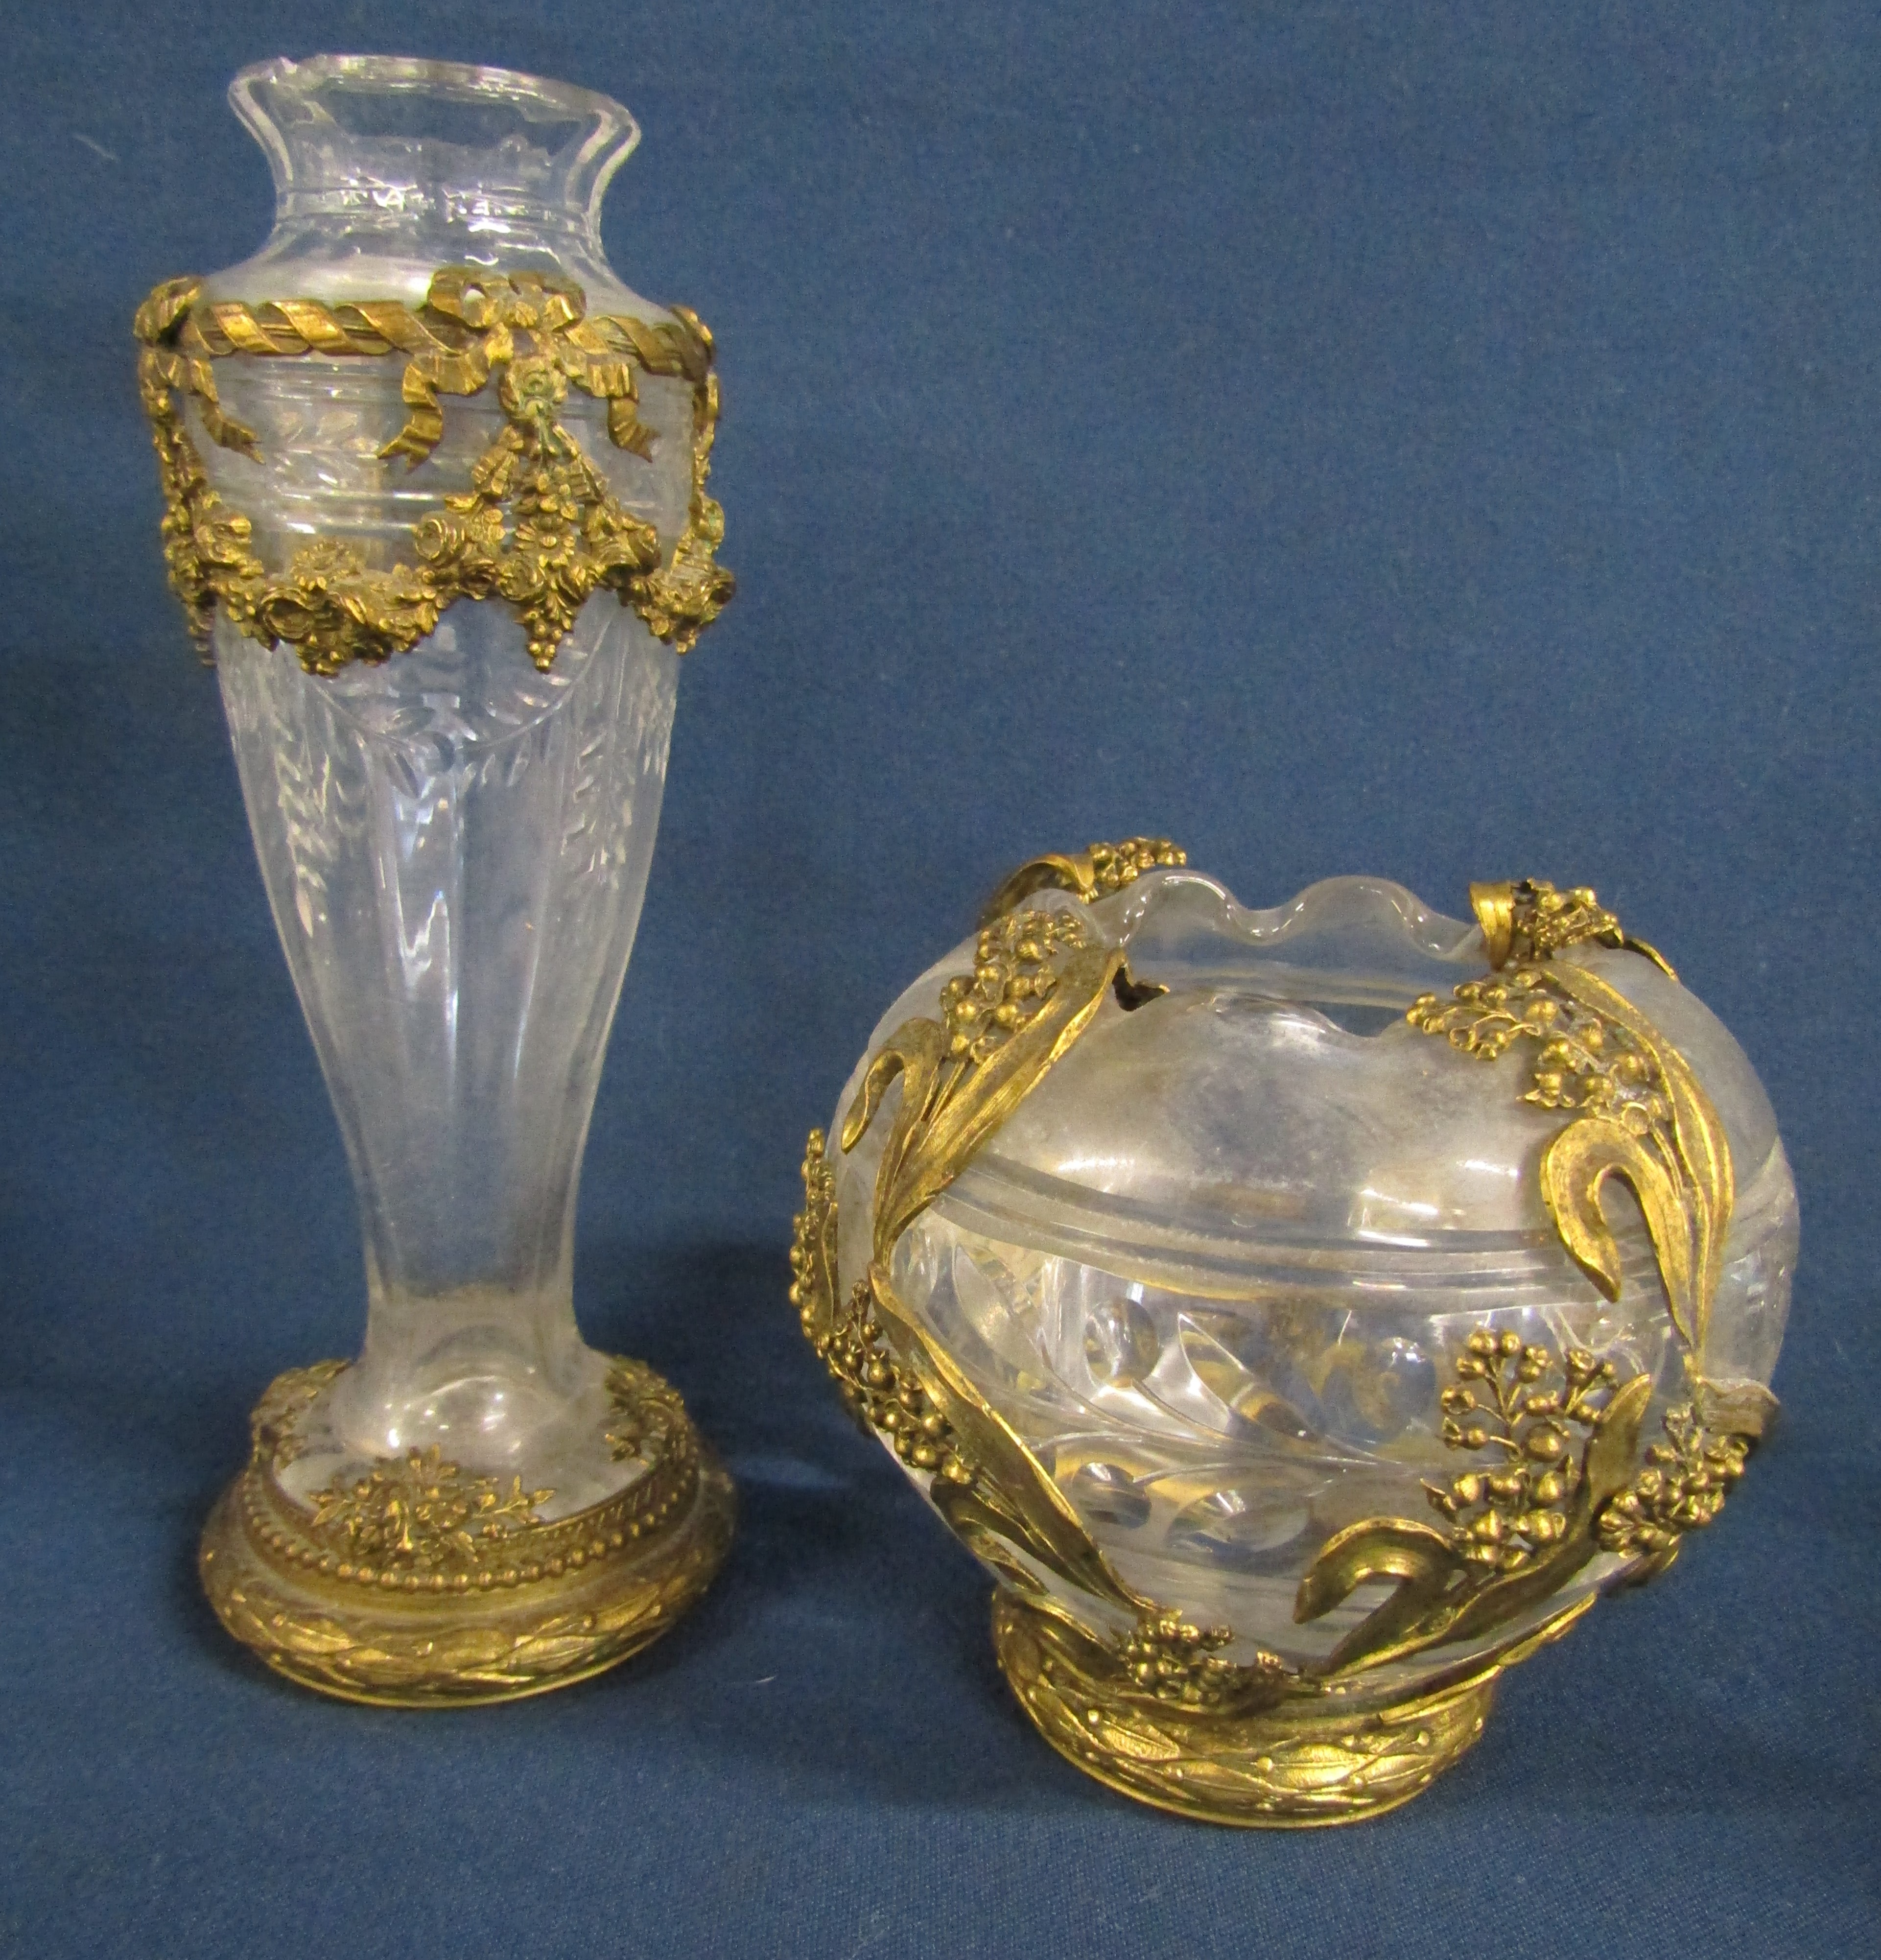 Glassware includes mounted vases, hors-d'oeuvre tray, vases etc - Image 5 of 5